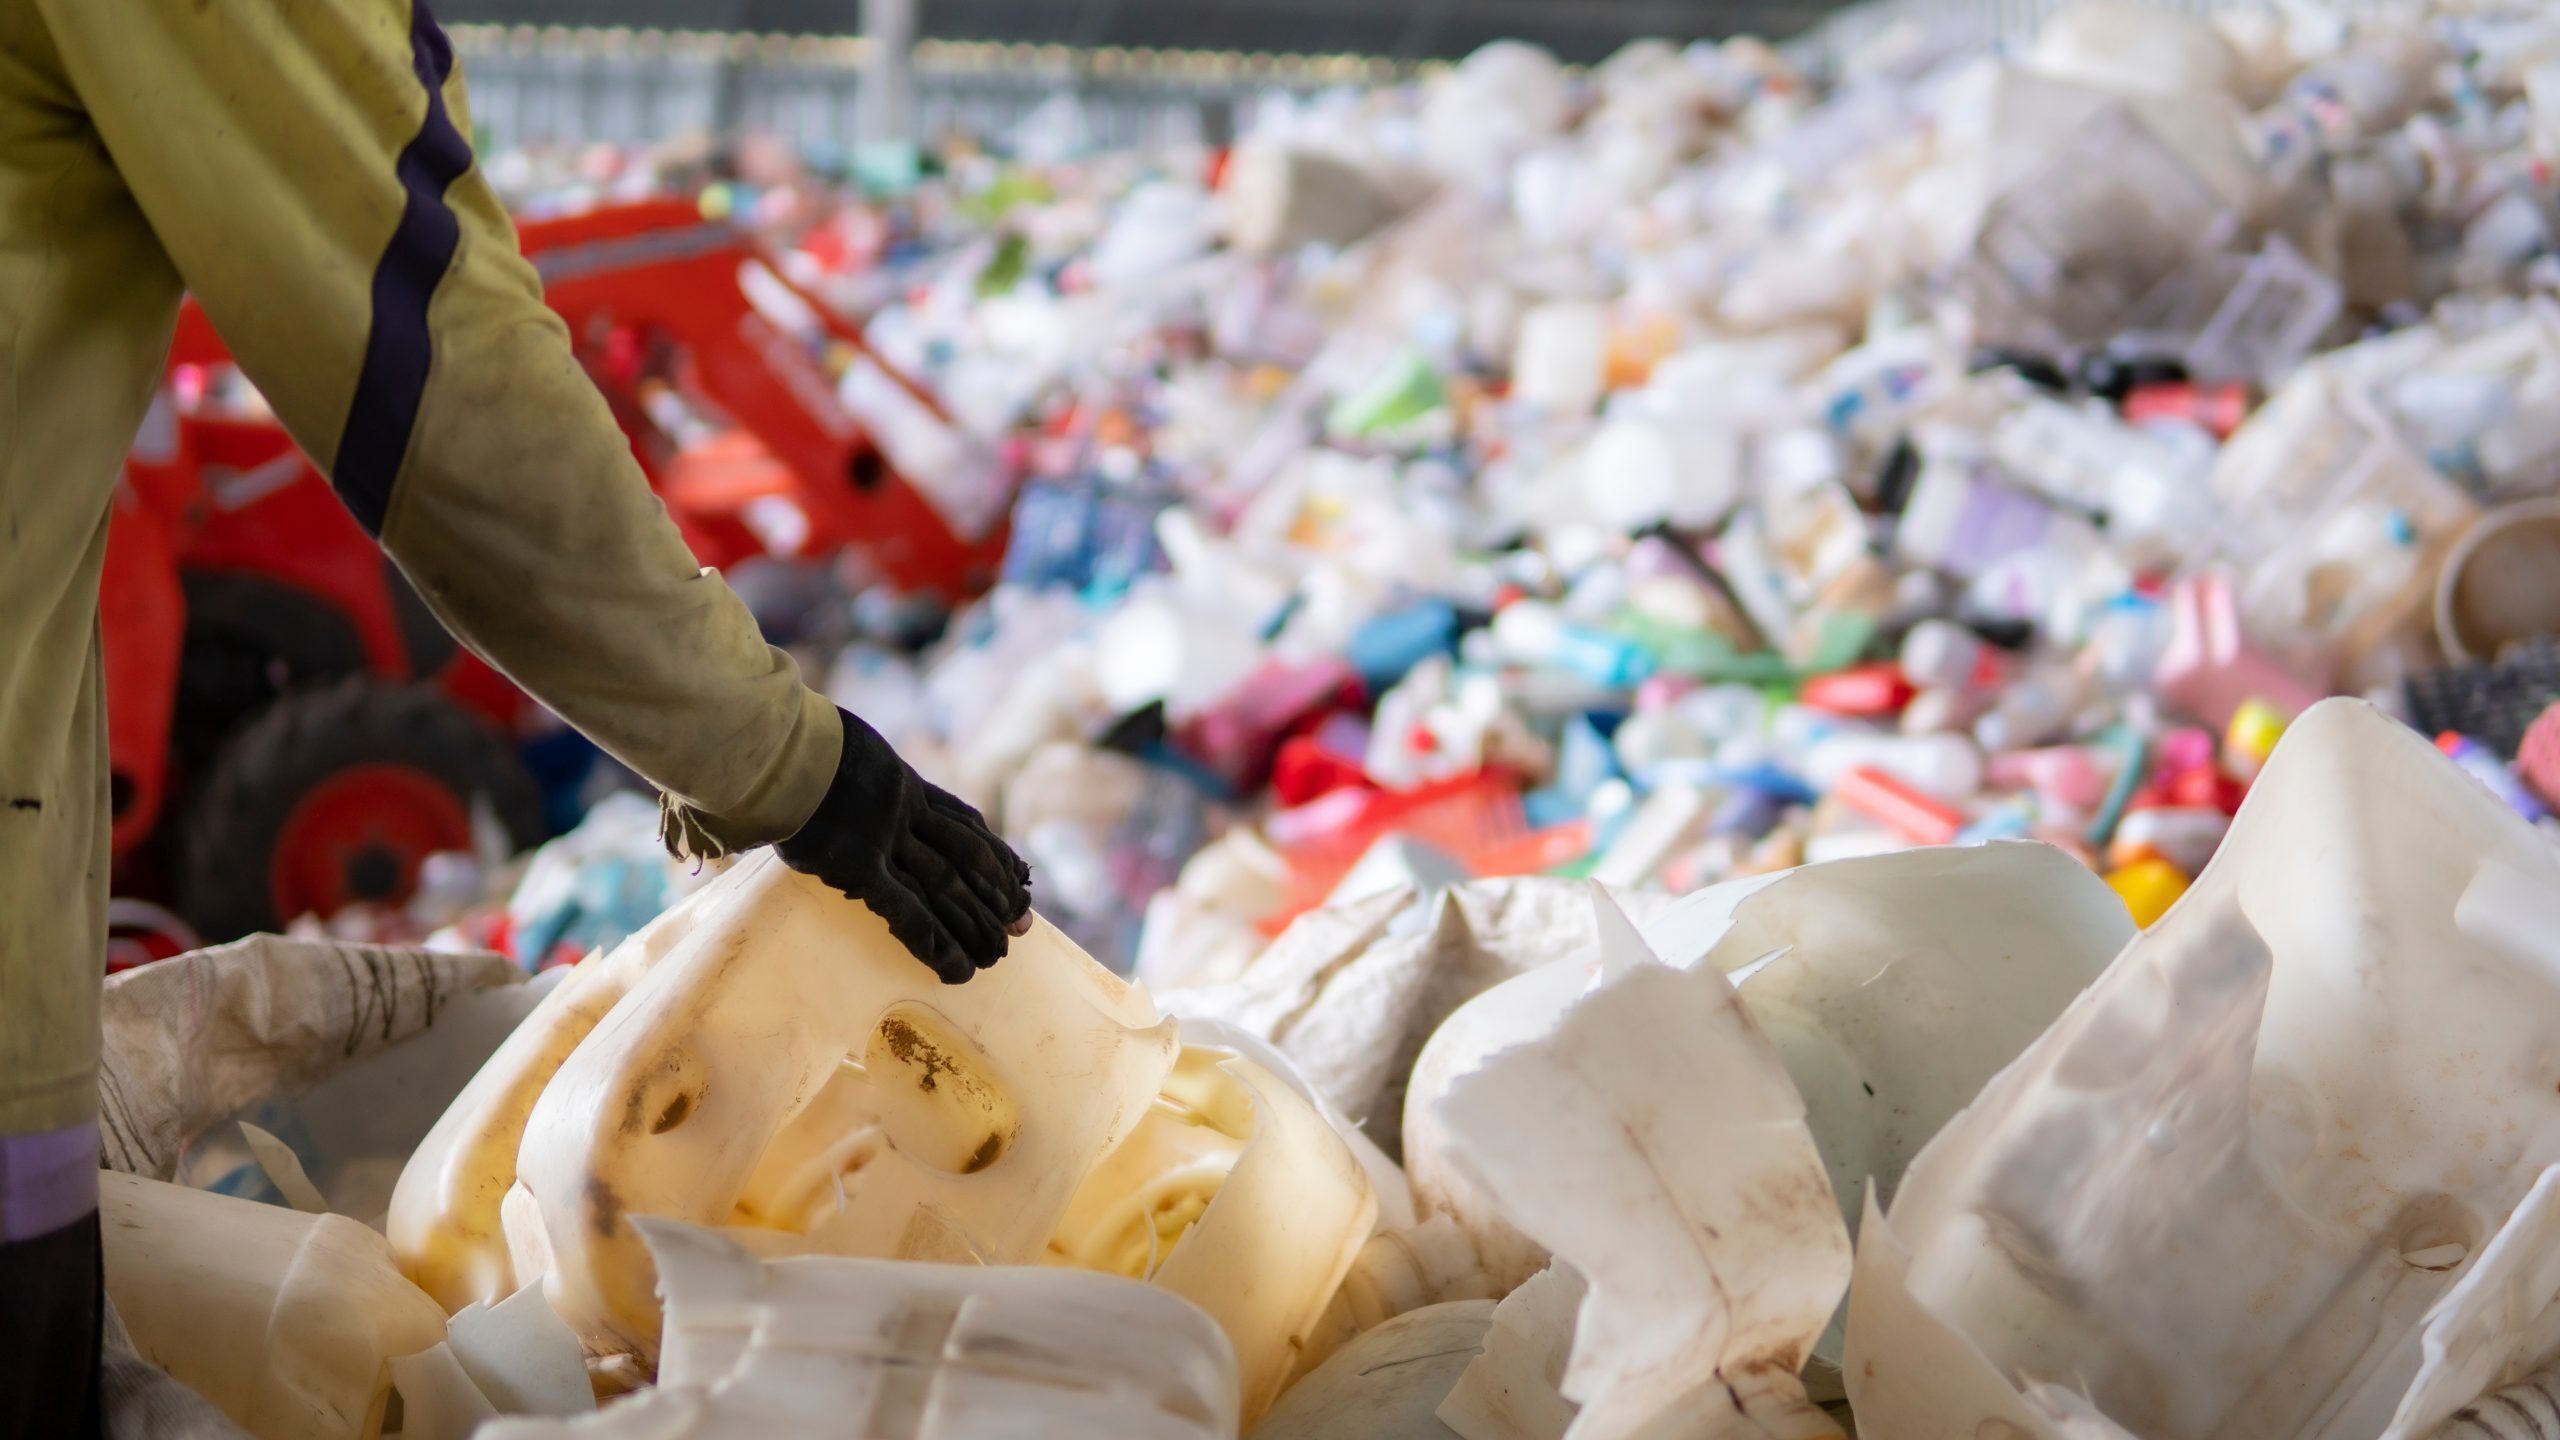 Workers are sorting plastic waste in the garbage factory